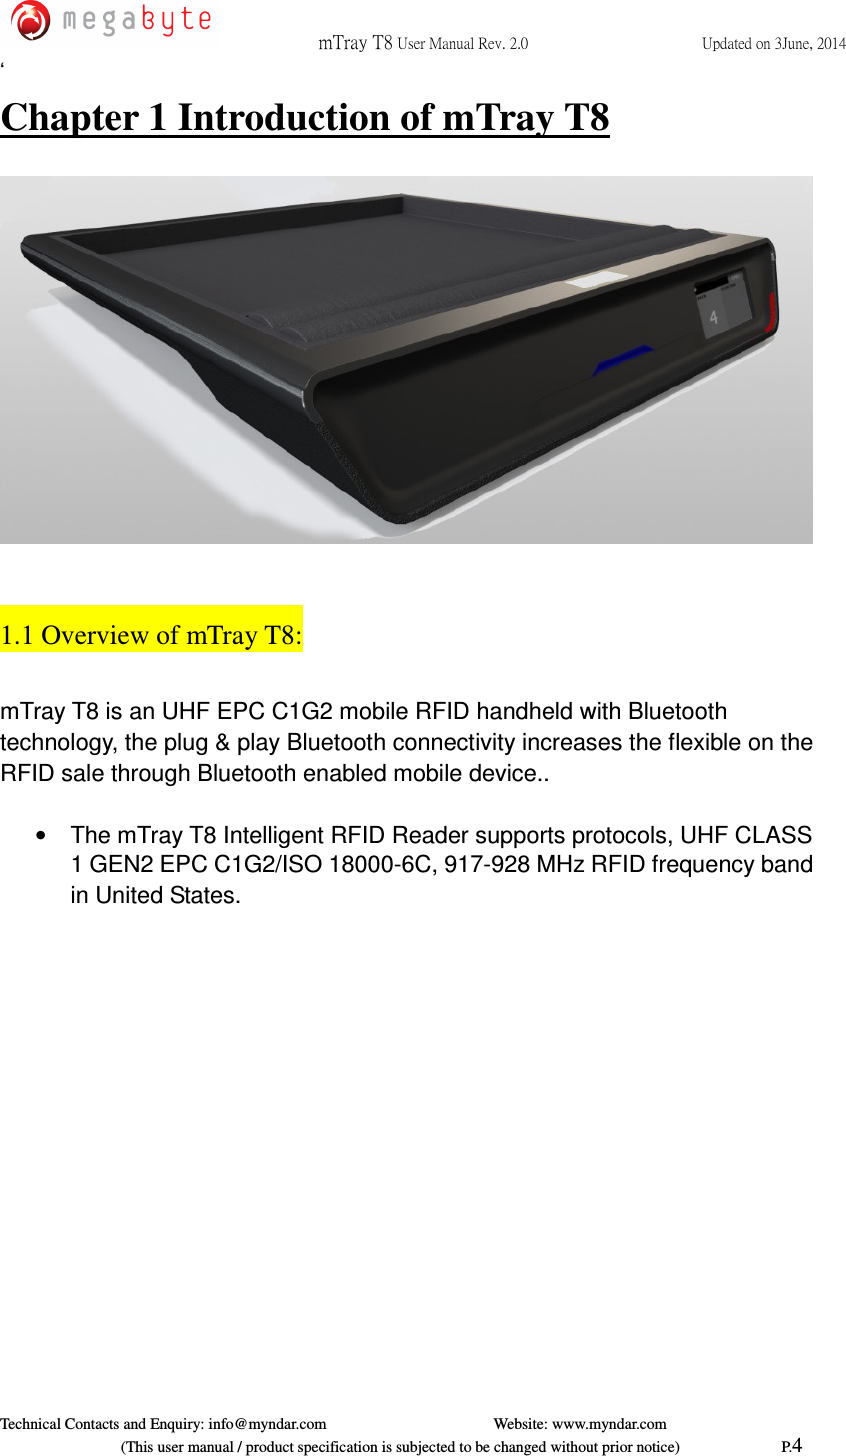  mTray T8 User Manual Rev. 2.0  Updated on 3June, 2014     Technical Contacts and Enquiry: info@myndar.com         Website: www.myndar.com                             (This user manual / product specification is subjected to be changed without prior notice)                          P.4 ‘ Chapter 1 Introduction of mTray T8    1.1 Overview of mTray T8:  mTray T8 is an UHF EPC C1G2 mobile RFID handheld with Bluetooth technology, the plug &amp; play Bluetooth connectivity increases the flexible on the RFID sale through Bluetooth enabled mobile device..  •  The mTray T8 Intelligent RFID Reader supports protocols, UHF CLASS 1 GEN2 EPC C1G2/ISO 18000-6C, 917-928 MHz RFID frequency band in United States. 